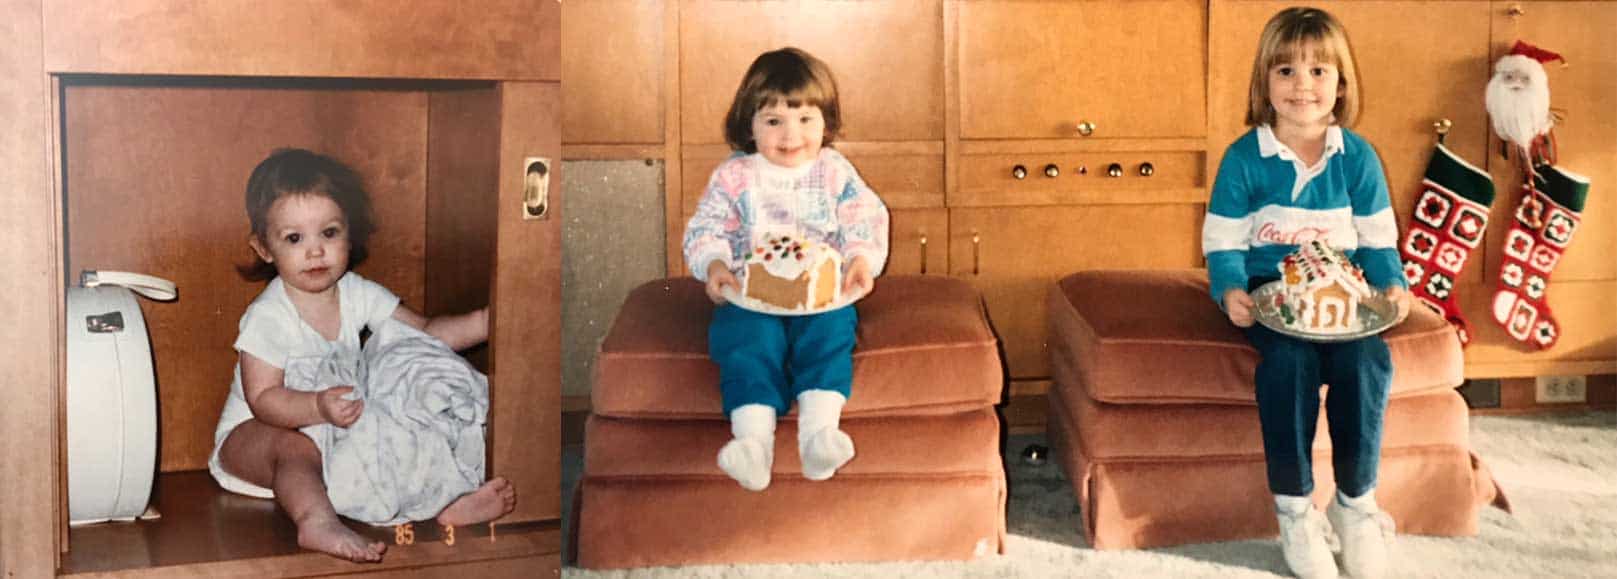 Left: Lindsey Stewart playing in the state-of-the-art built in cabinets in her childhood home.  Right: Lindsey's sister, Allie (L), and Lindsey (R) posing with their gingerbread houses in front of the built in cabinets.